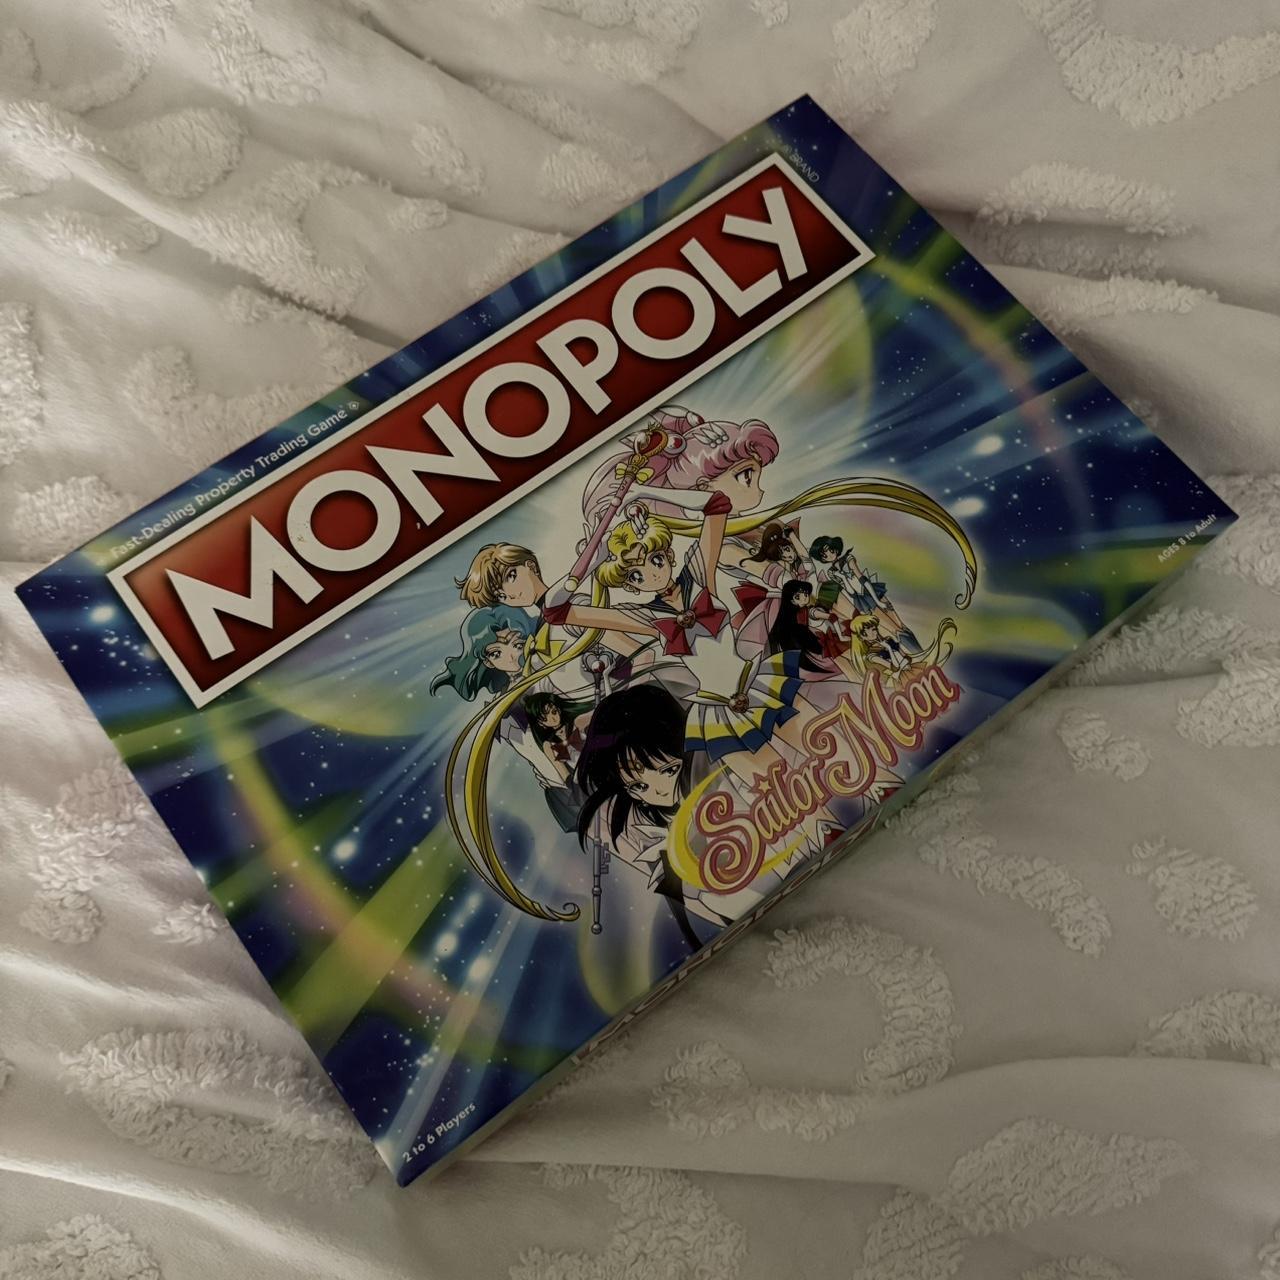 A Dragon Ball: Super-themed Monopoly board game is now available